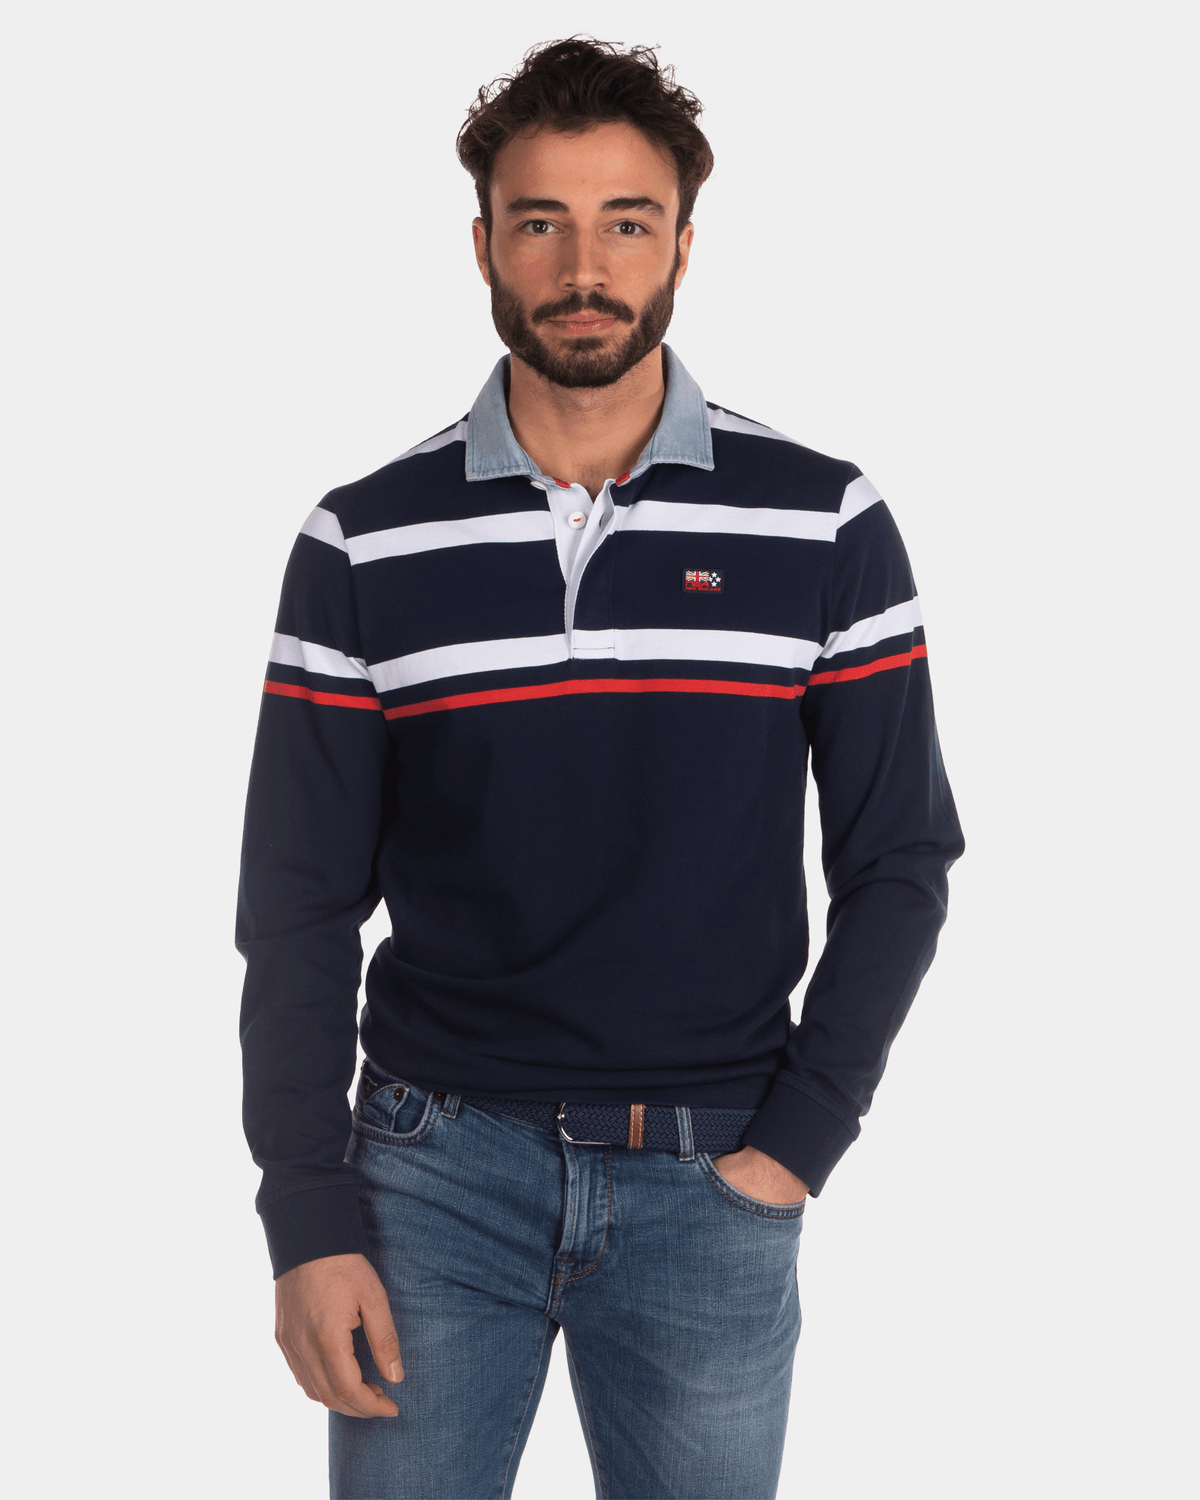 Grofgestreept Rugby Shirt Blauw Wit Rood - Industrial Navy